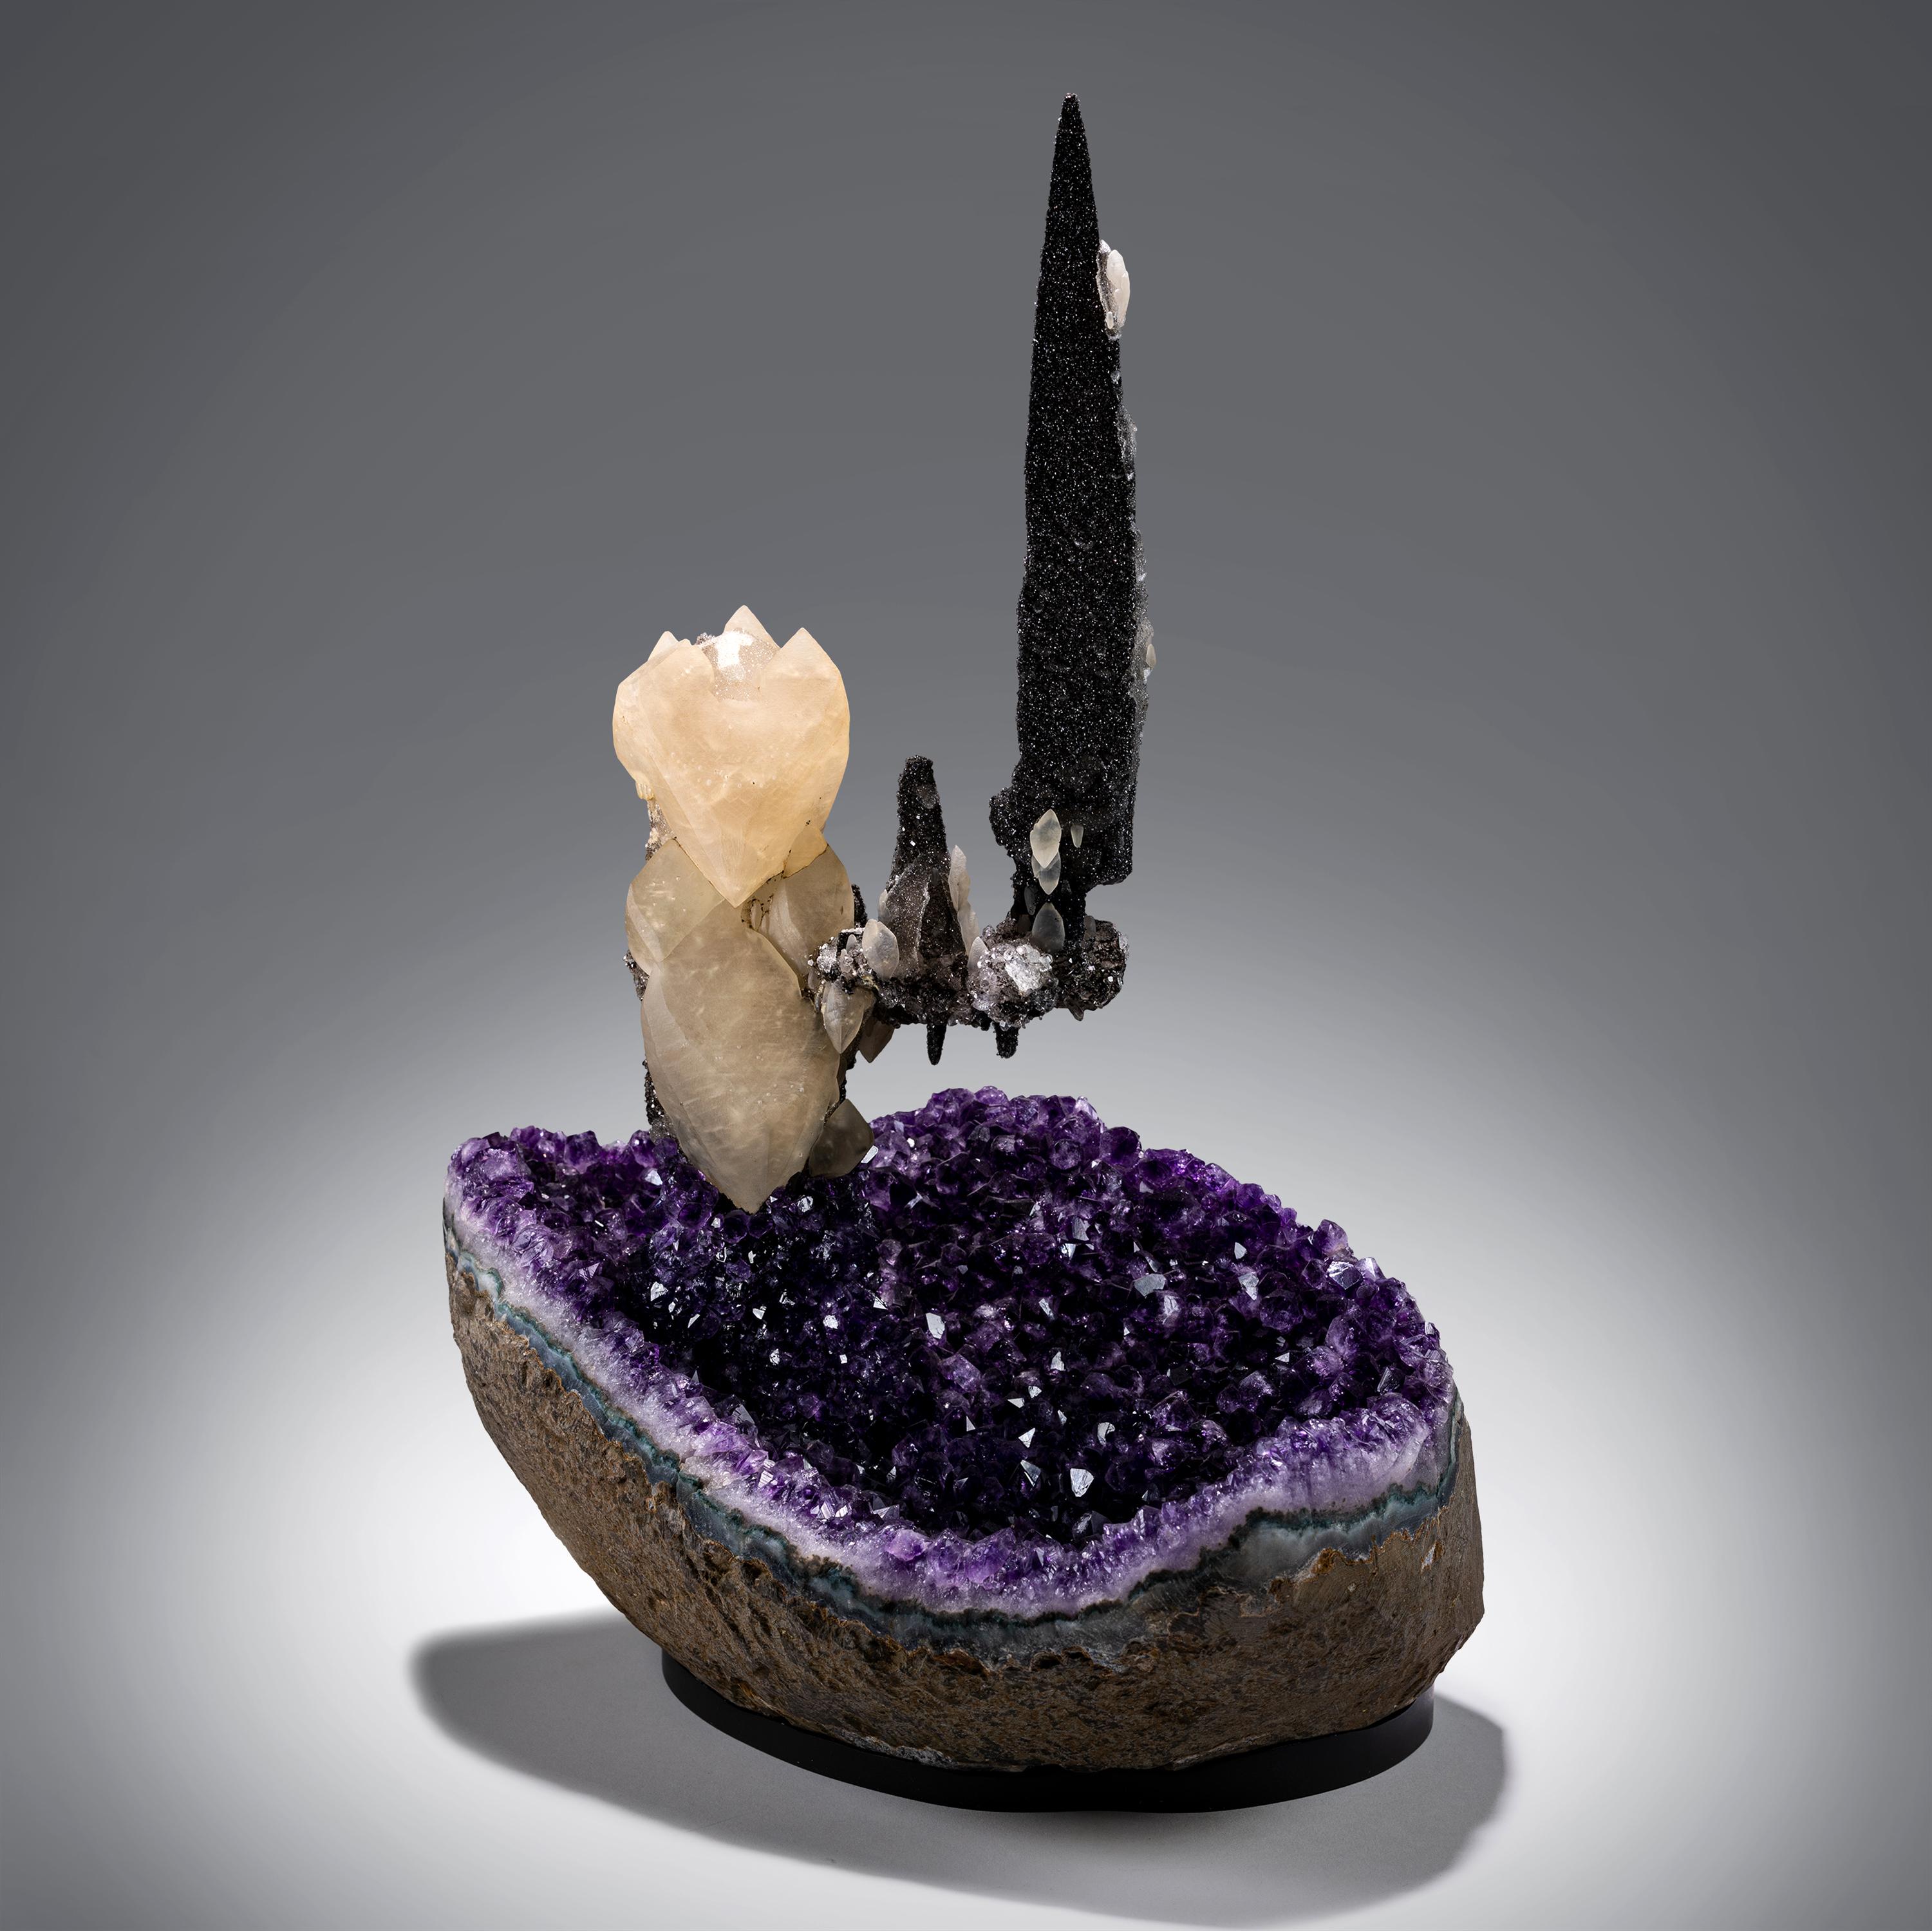 Artigas is known for amethysts of the darkest and richest hues of purple. Lustrous and richly-toned, they are instantly recognizable and not uncommon in the mineral market. What sets certain specimens apart is when they have multigenerational